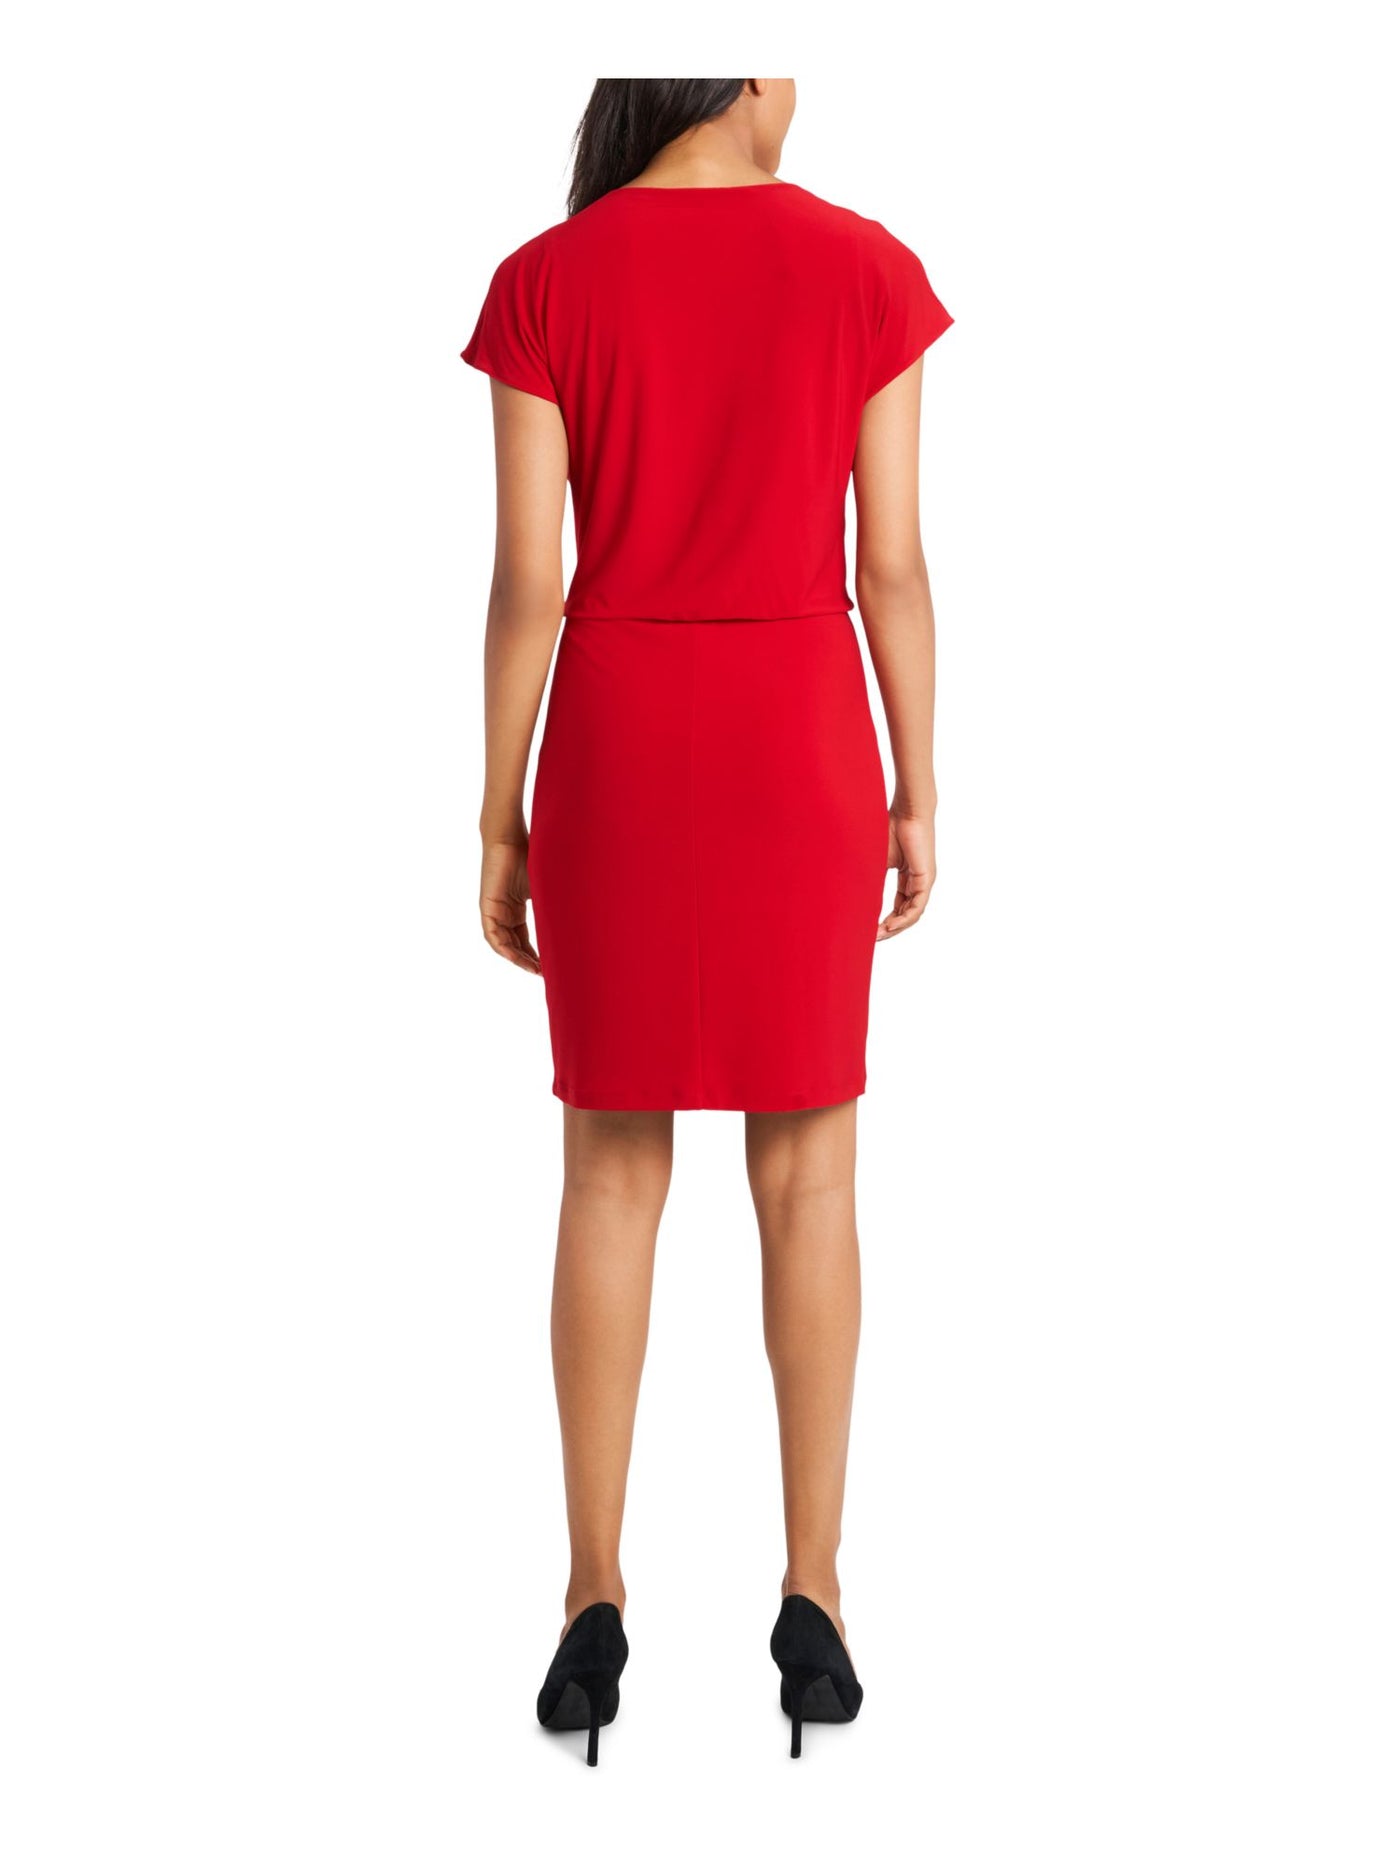 JBS LIMITED Womens Red Embellished Tie Front Cap Sleeve Cowl Neck Above The Knee Wear To Work Sheath Dress L